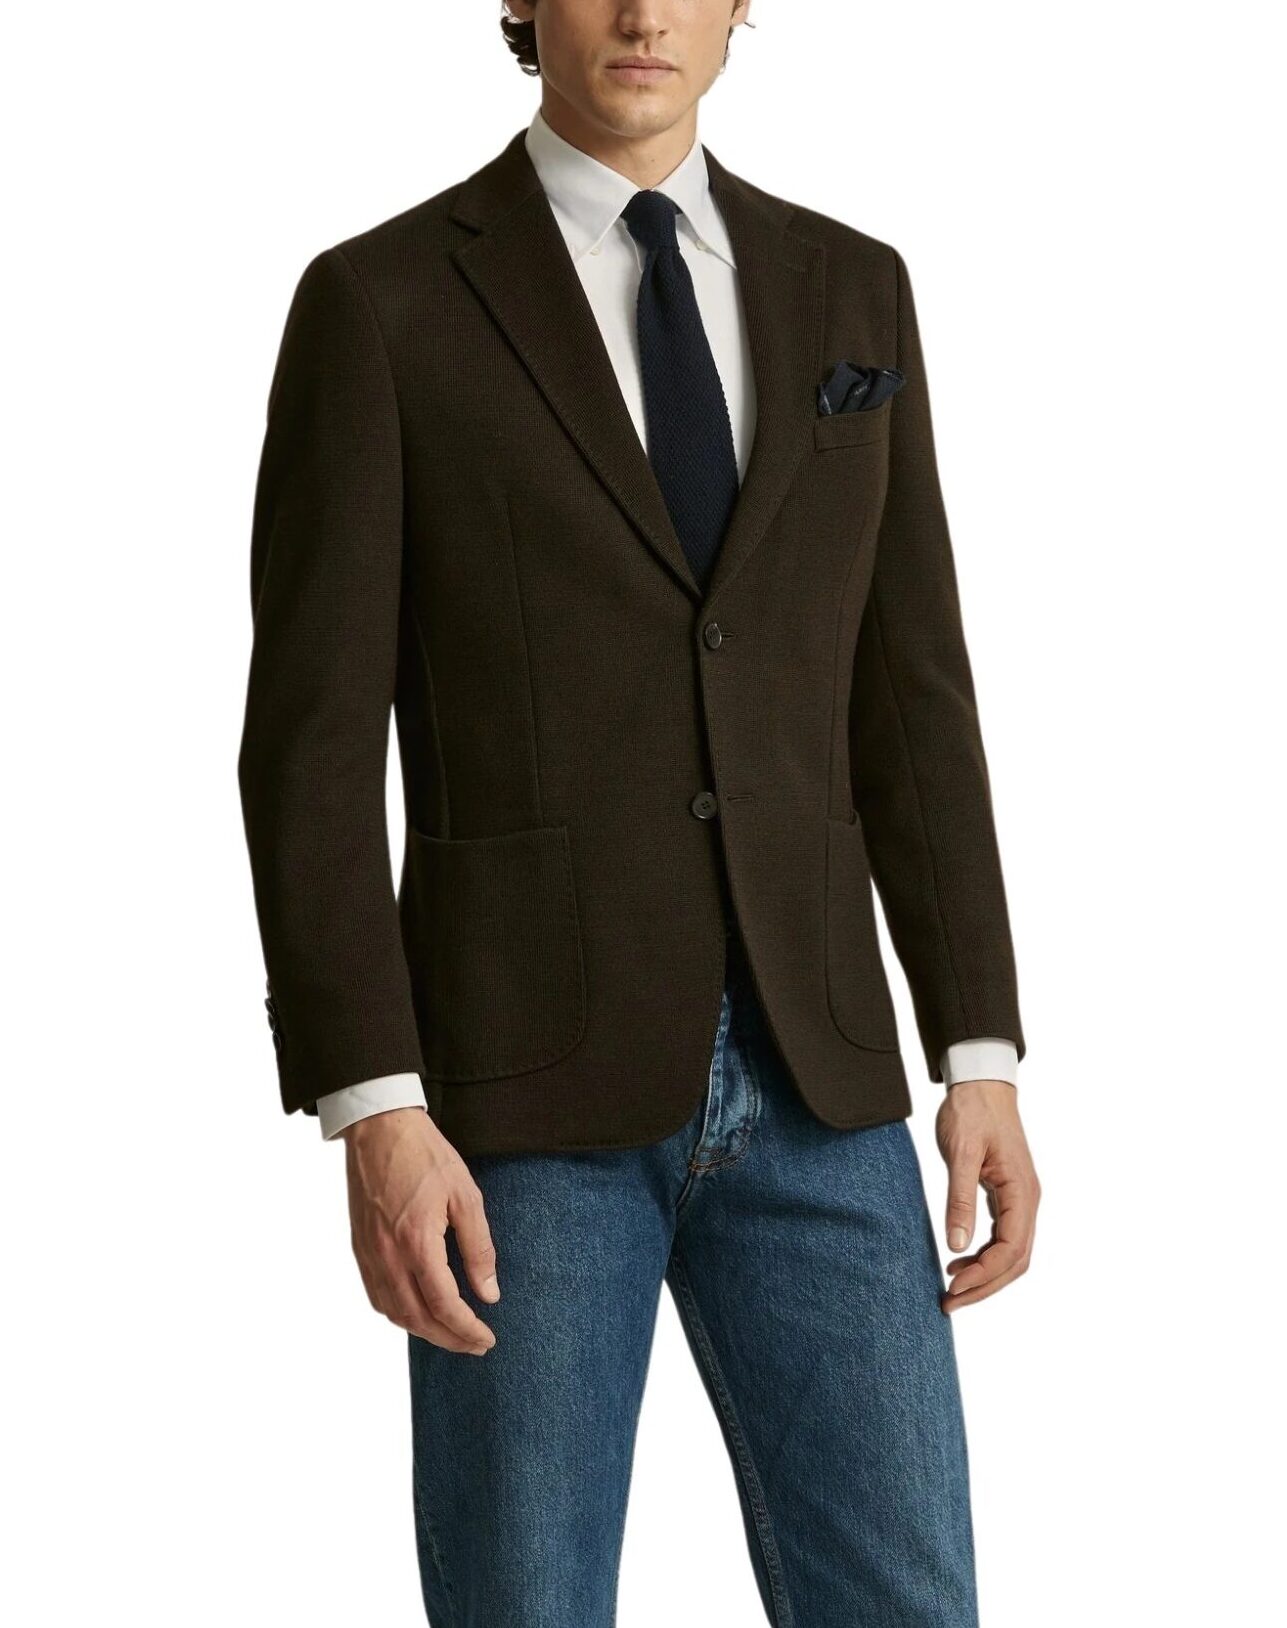 1744_4b11d10bd7-200913-mike-jersey-jacket-80-brown-1-full